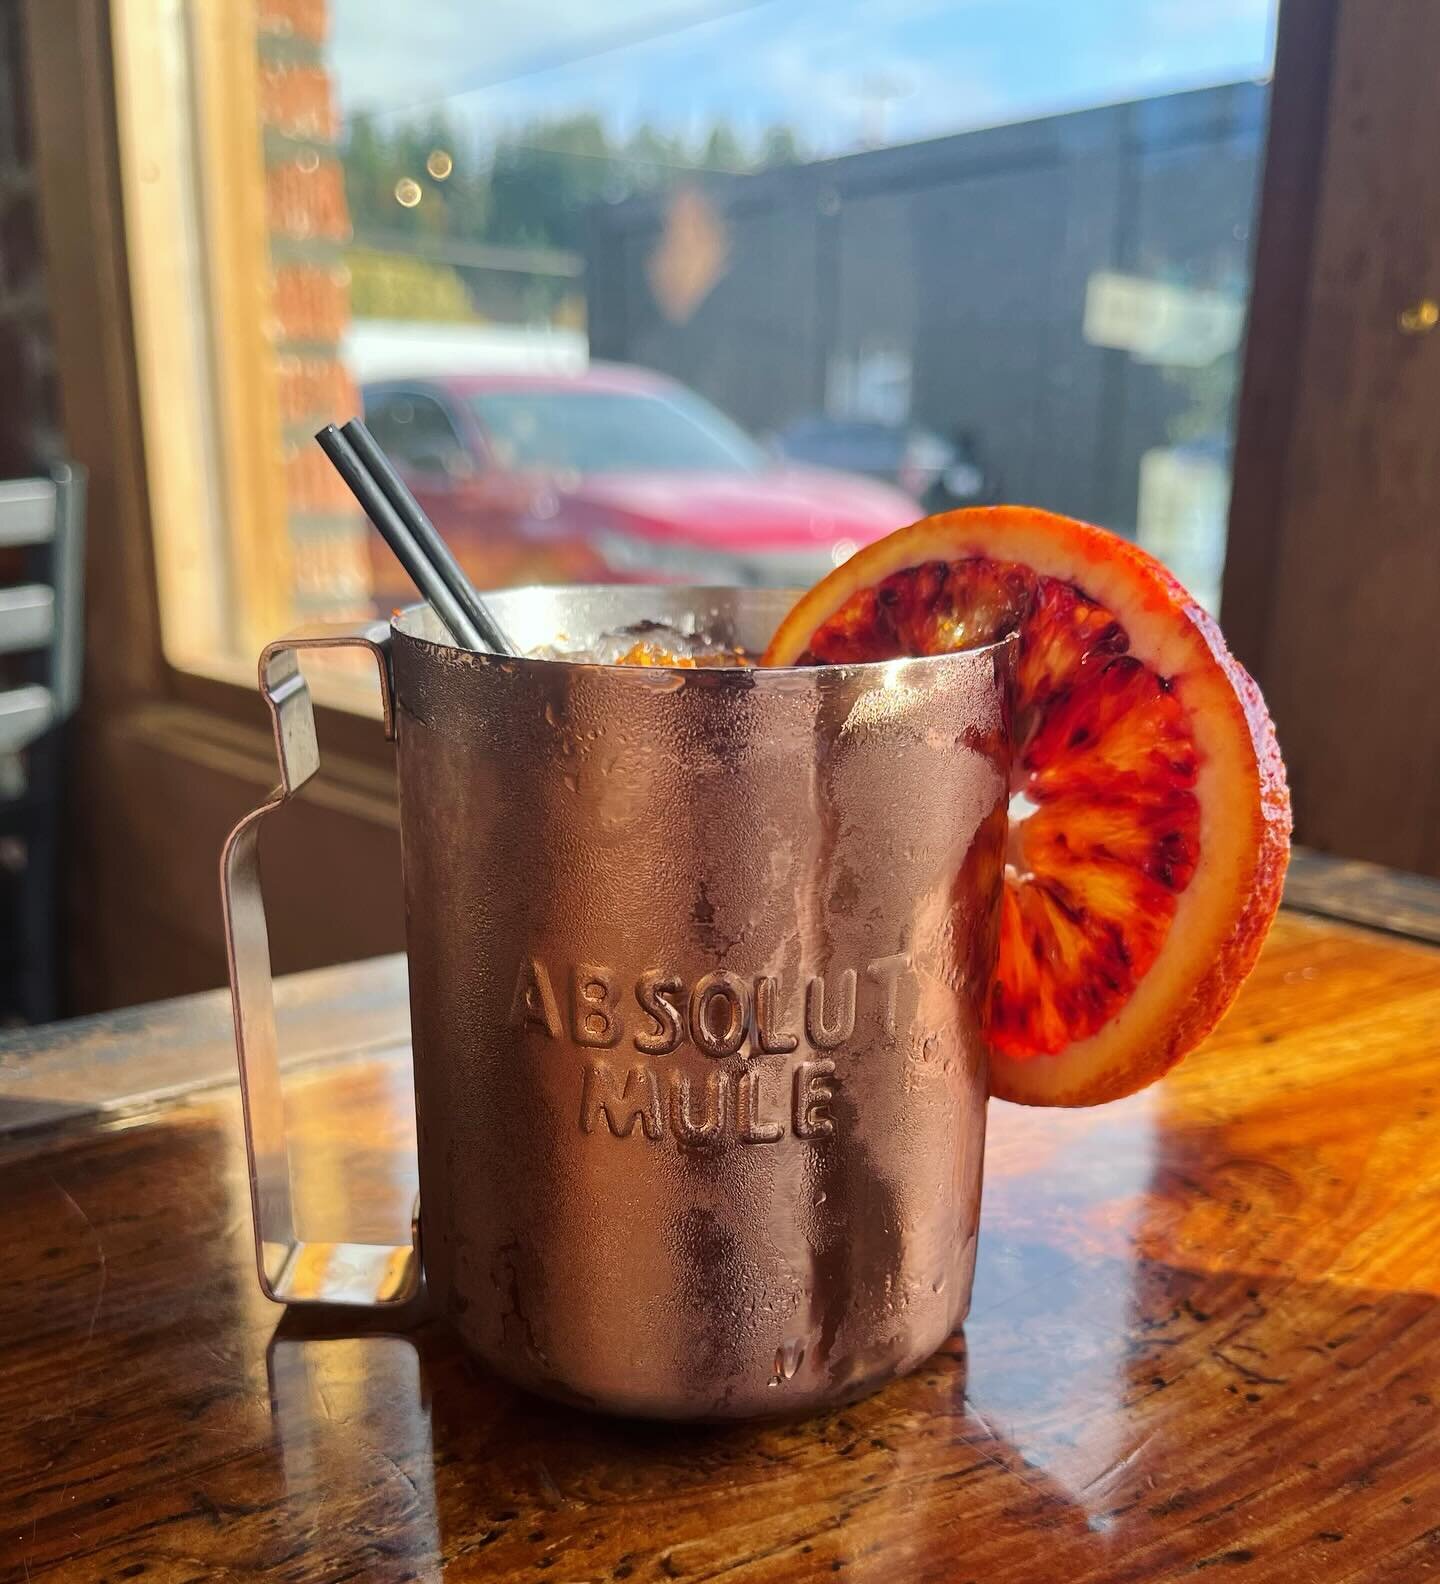 Mezcal Mule for Margarita Monday! Ilegal Mezcal, lime, blood orange pur&eacute;e, muddled &amp; topped with ginger beer with a sprinkle of Tajin on top, $9.50.